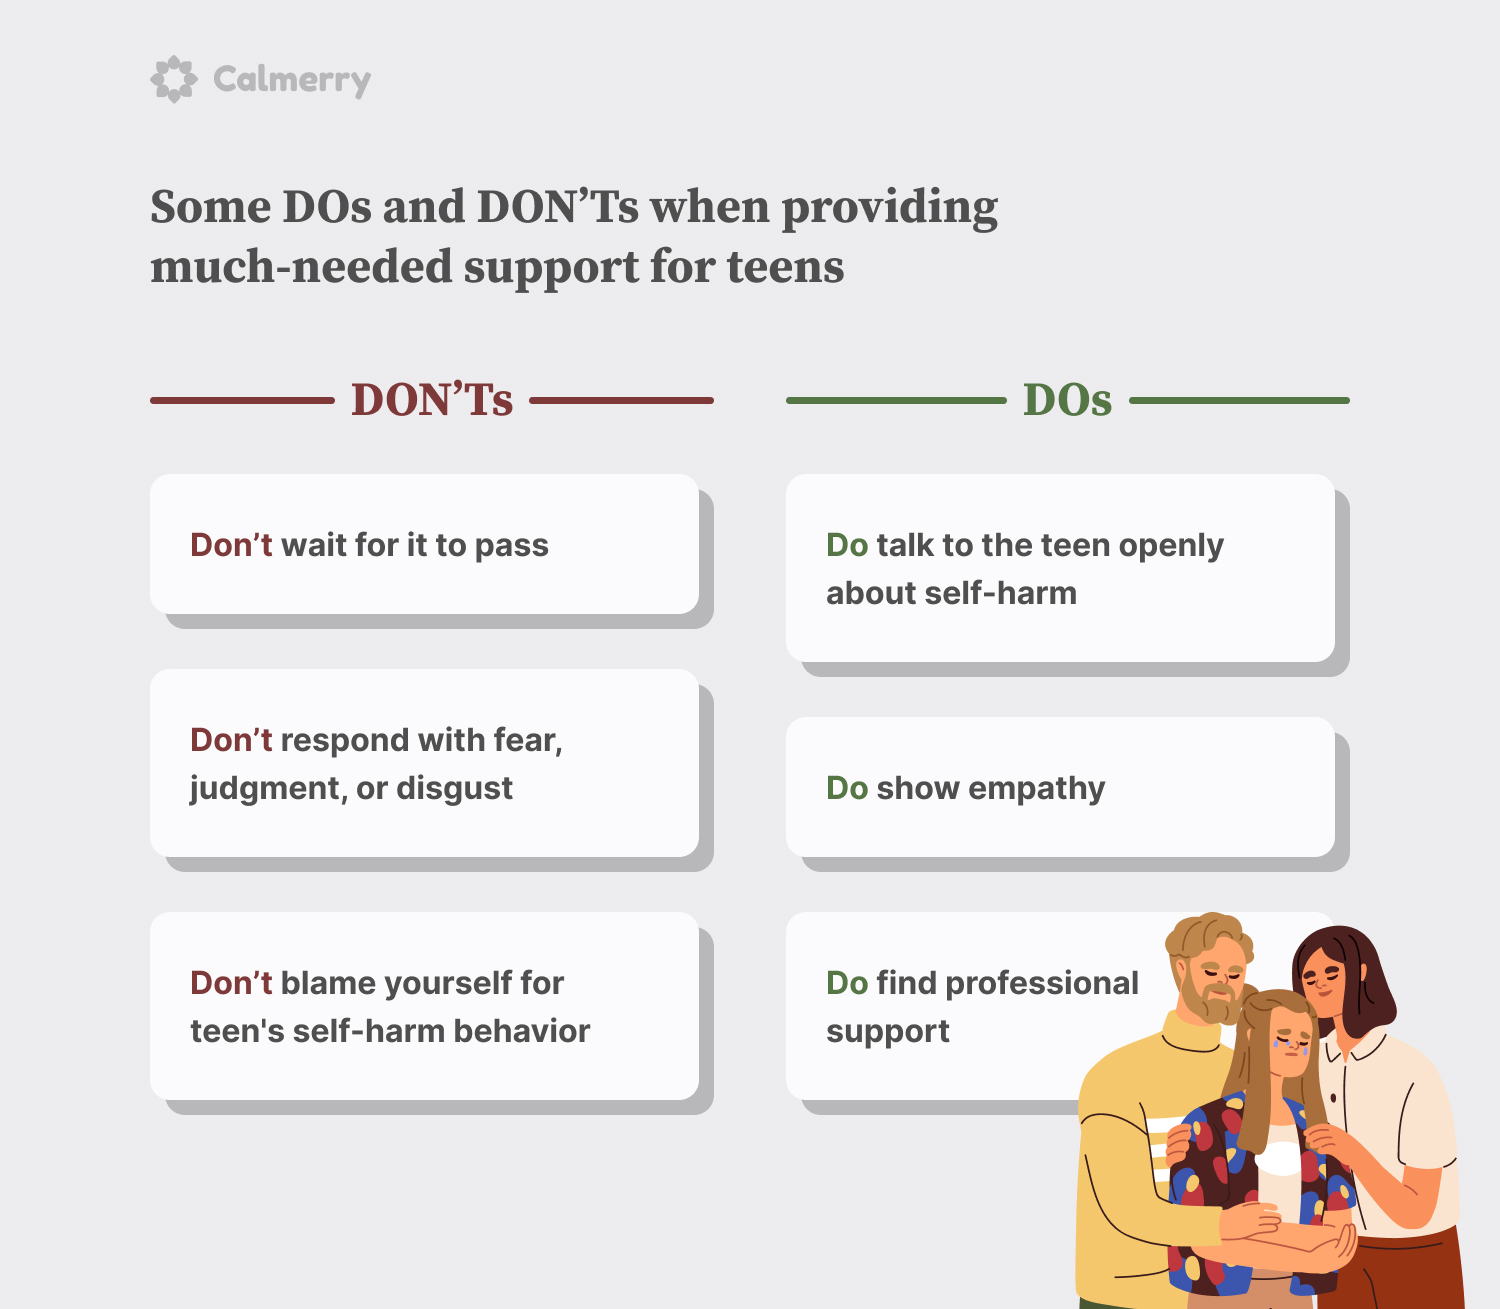 Some DOs and DON’Ts when providing much-needed support for teens